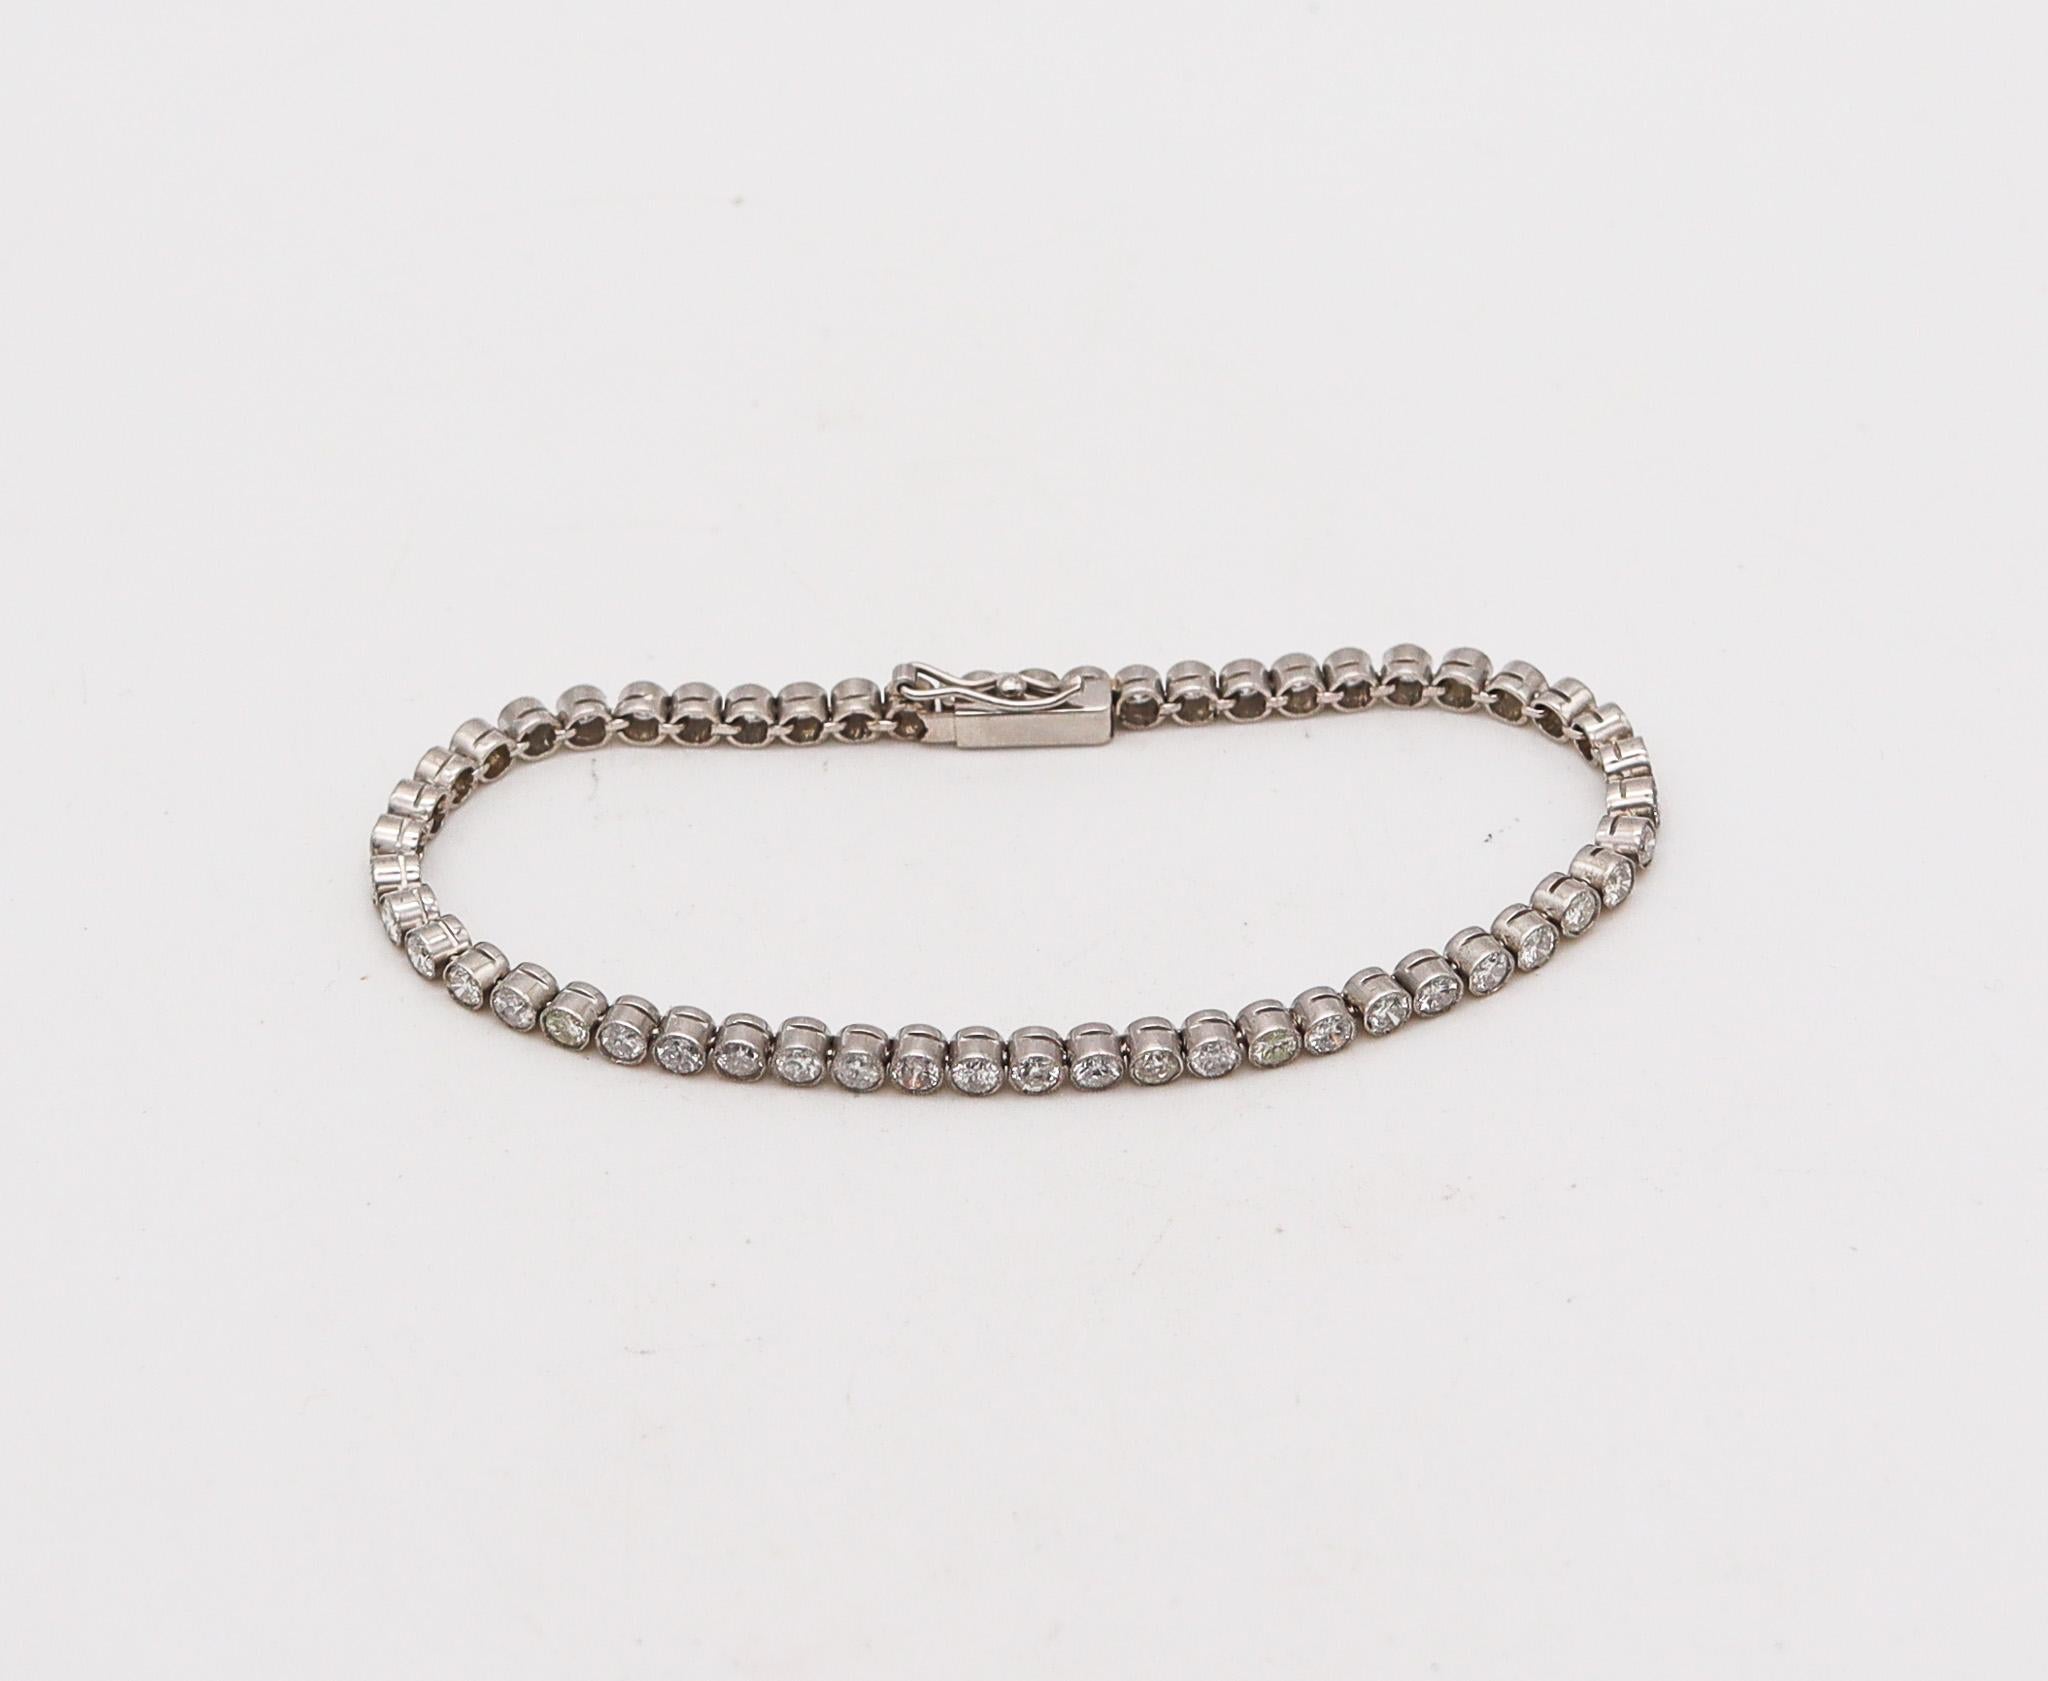 An art deco Riviera diamonds bracelet.

Beautiful Riviera diamonds bracelet, created during the art deco period, back in the 1935. This bracelet has been crafted with impeccable details in solid platinum and embellished with fifty-three calibrated